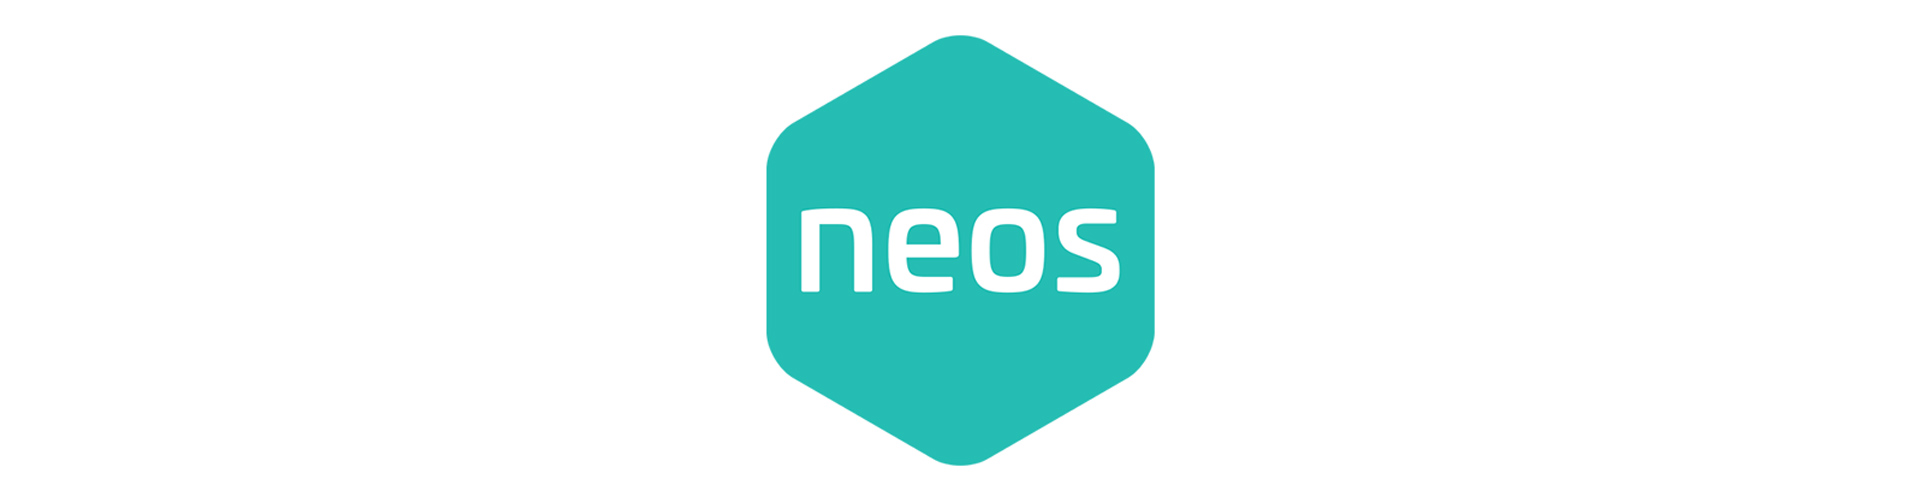 Neos enters partnership with Hood Group